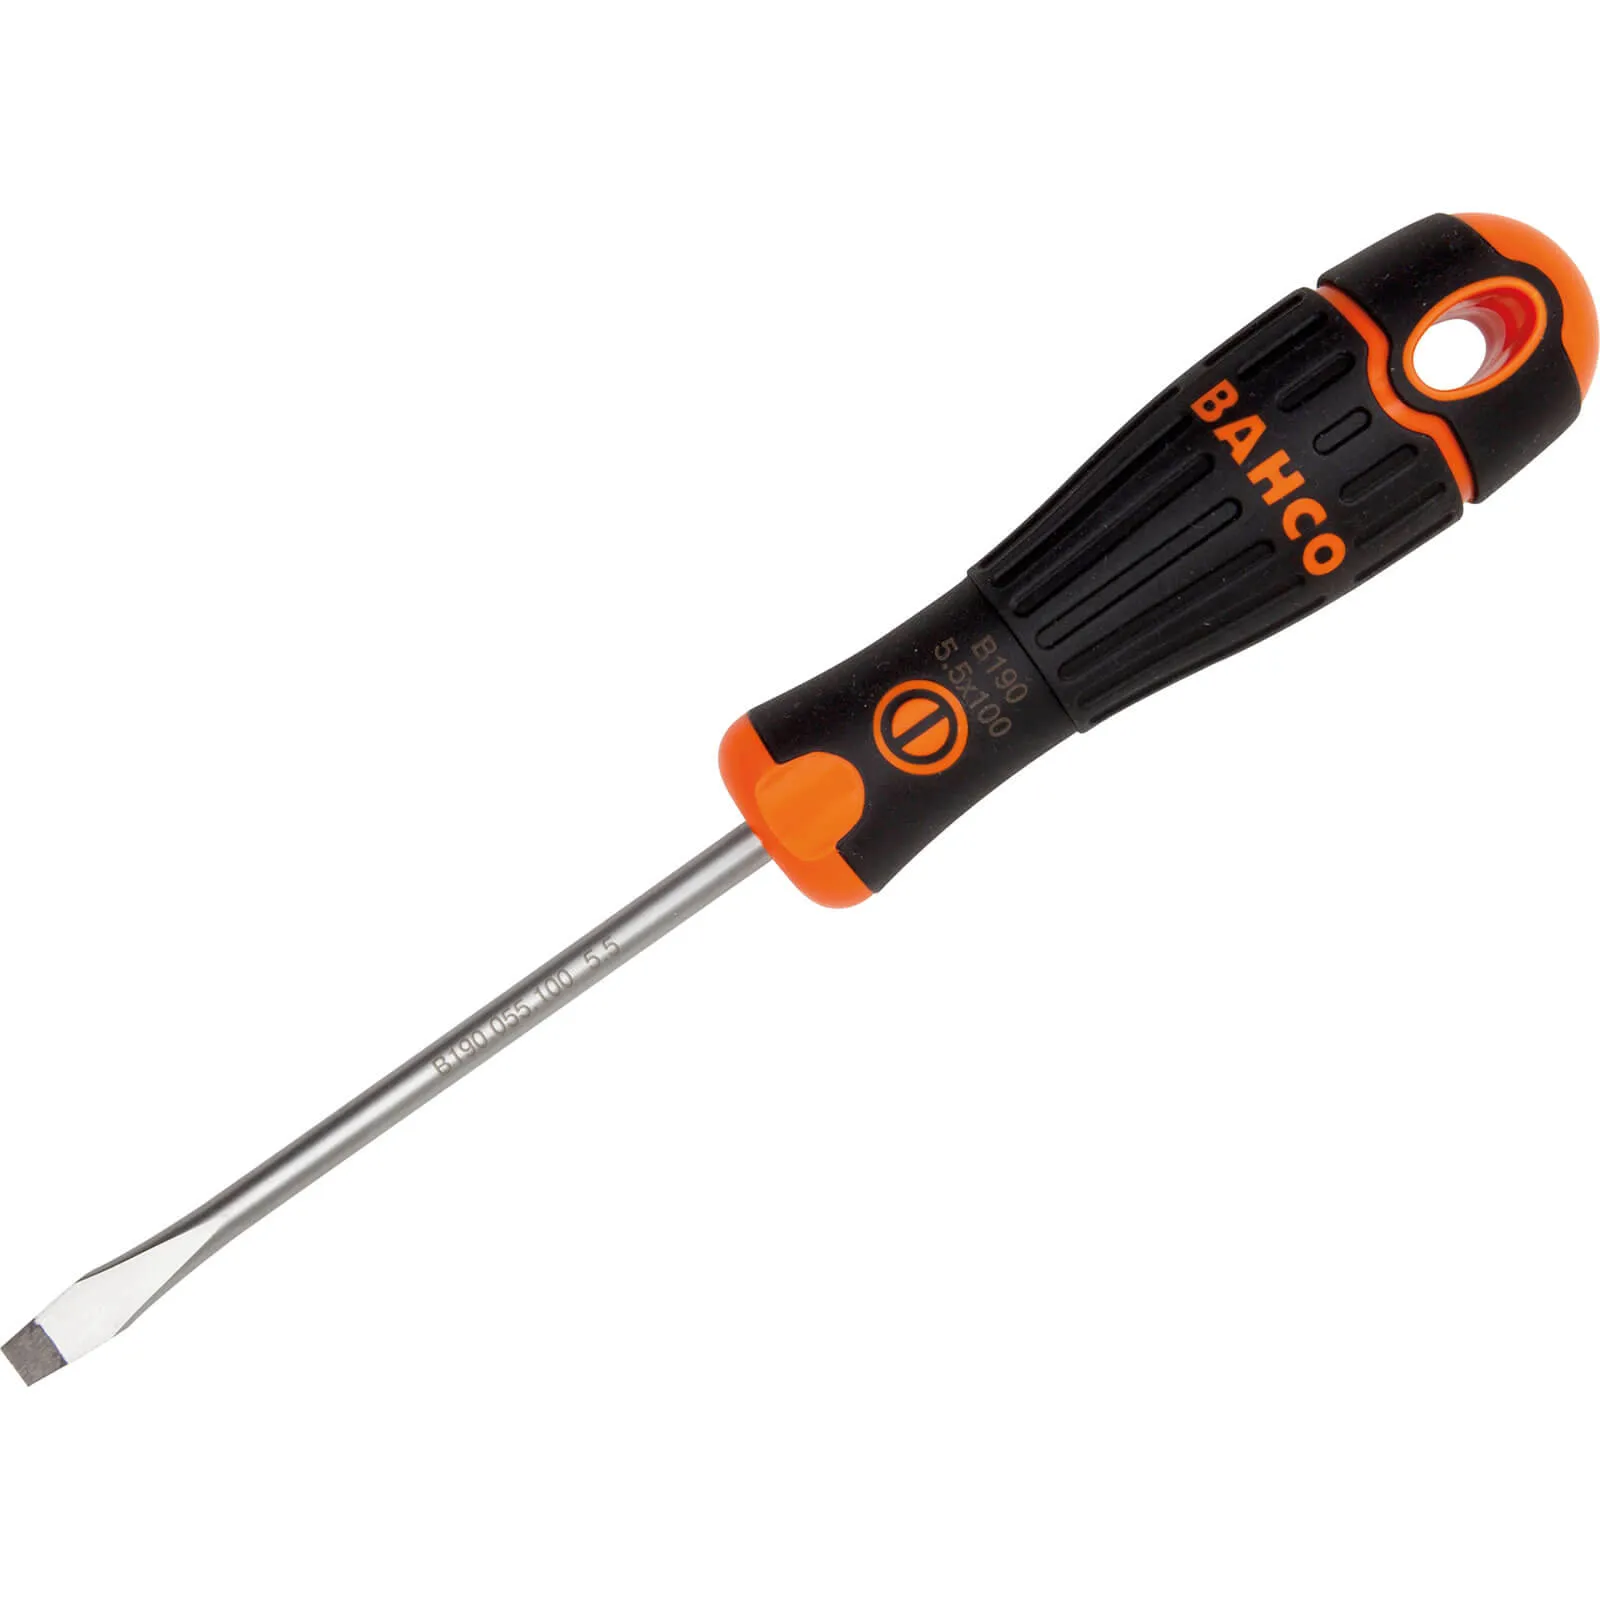 Bahco COFIT Flared Slotted Screwdriver - 8mm, 175mm